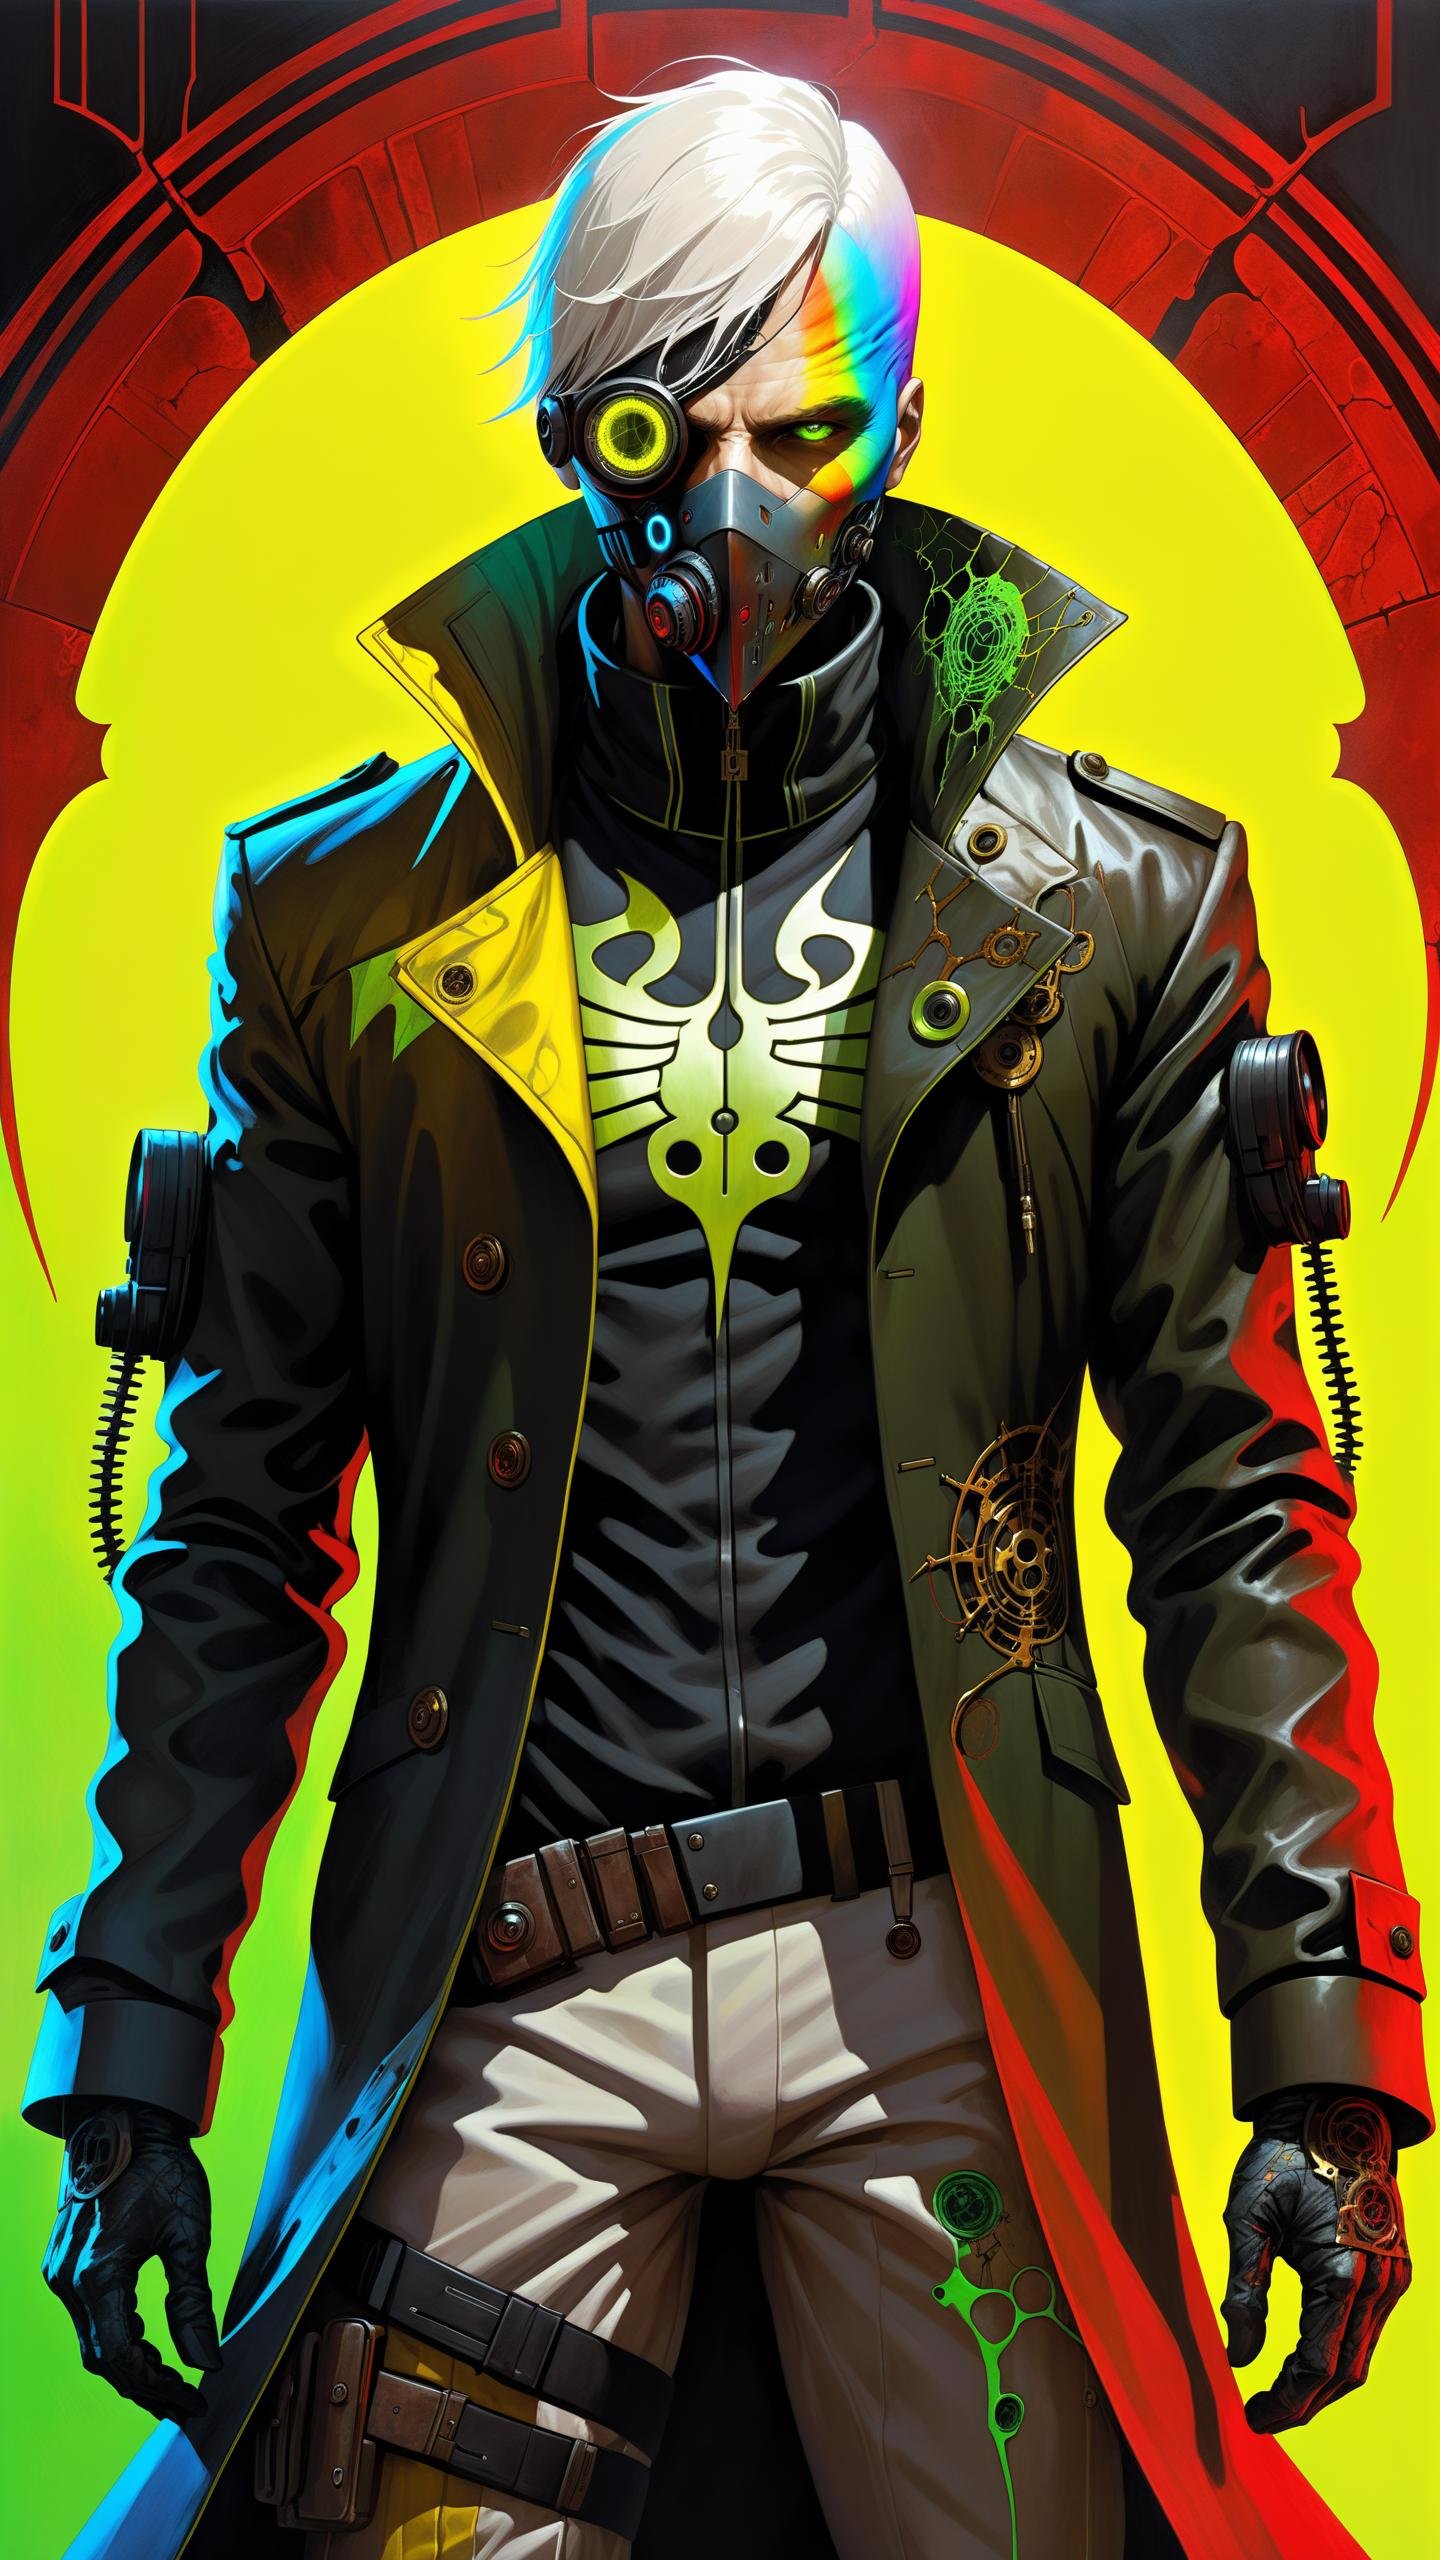 man with a pretty face, white hair, green eyes, ((aiden pearce, wearing a stylish cyberpunk uniform, wearing dedsec mask)), with a serious expression on his face, Hell walker, incombing death, hell, black bloody veins growing and intertwining out of the darkness, oozing thick yellow blood, veins growing and pumping blood, (male body:1.6), 1 man, vascular networks growing, connecting, expanding, red veins everywhere, zdzislaw beksinski, (sharp colors:1.3), (rainbow skin:1.1), (steampunk:1.2), ultra detailed, intricate, oil on canvas, ((dry brush, ultra sharp)), (surrealism:1.4), (disturbing:1.5), beksinski style painting, satanic symbols, (full torso), full body in frame, centered body, (male:1.2), realistic, ((intricate details)), (pale gothic evil king), dynamic pose, perfect face, (realistic eyes), perfect eyes, ((dark gothic background)), sharp focus, cartoon